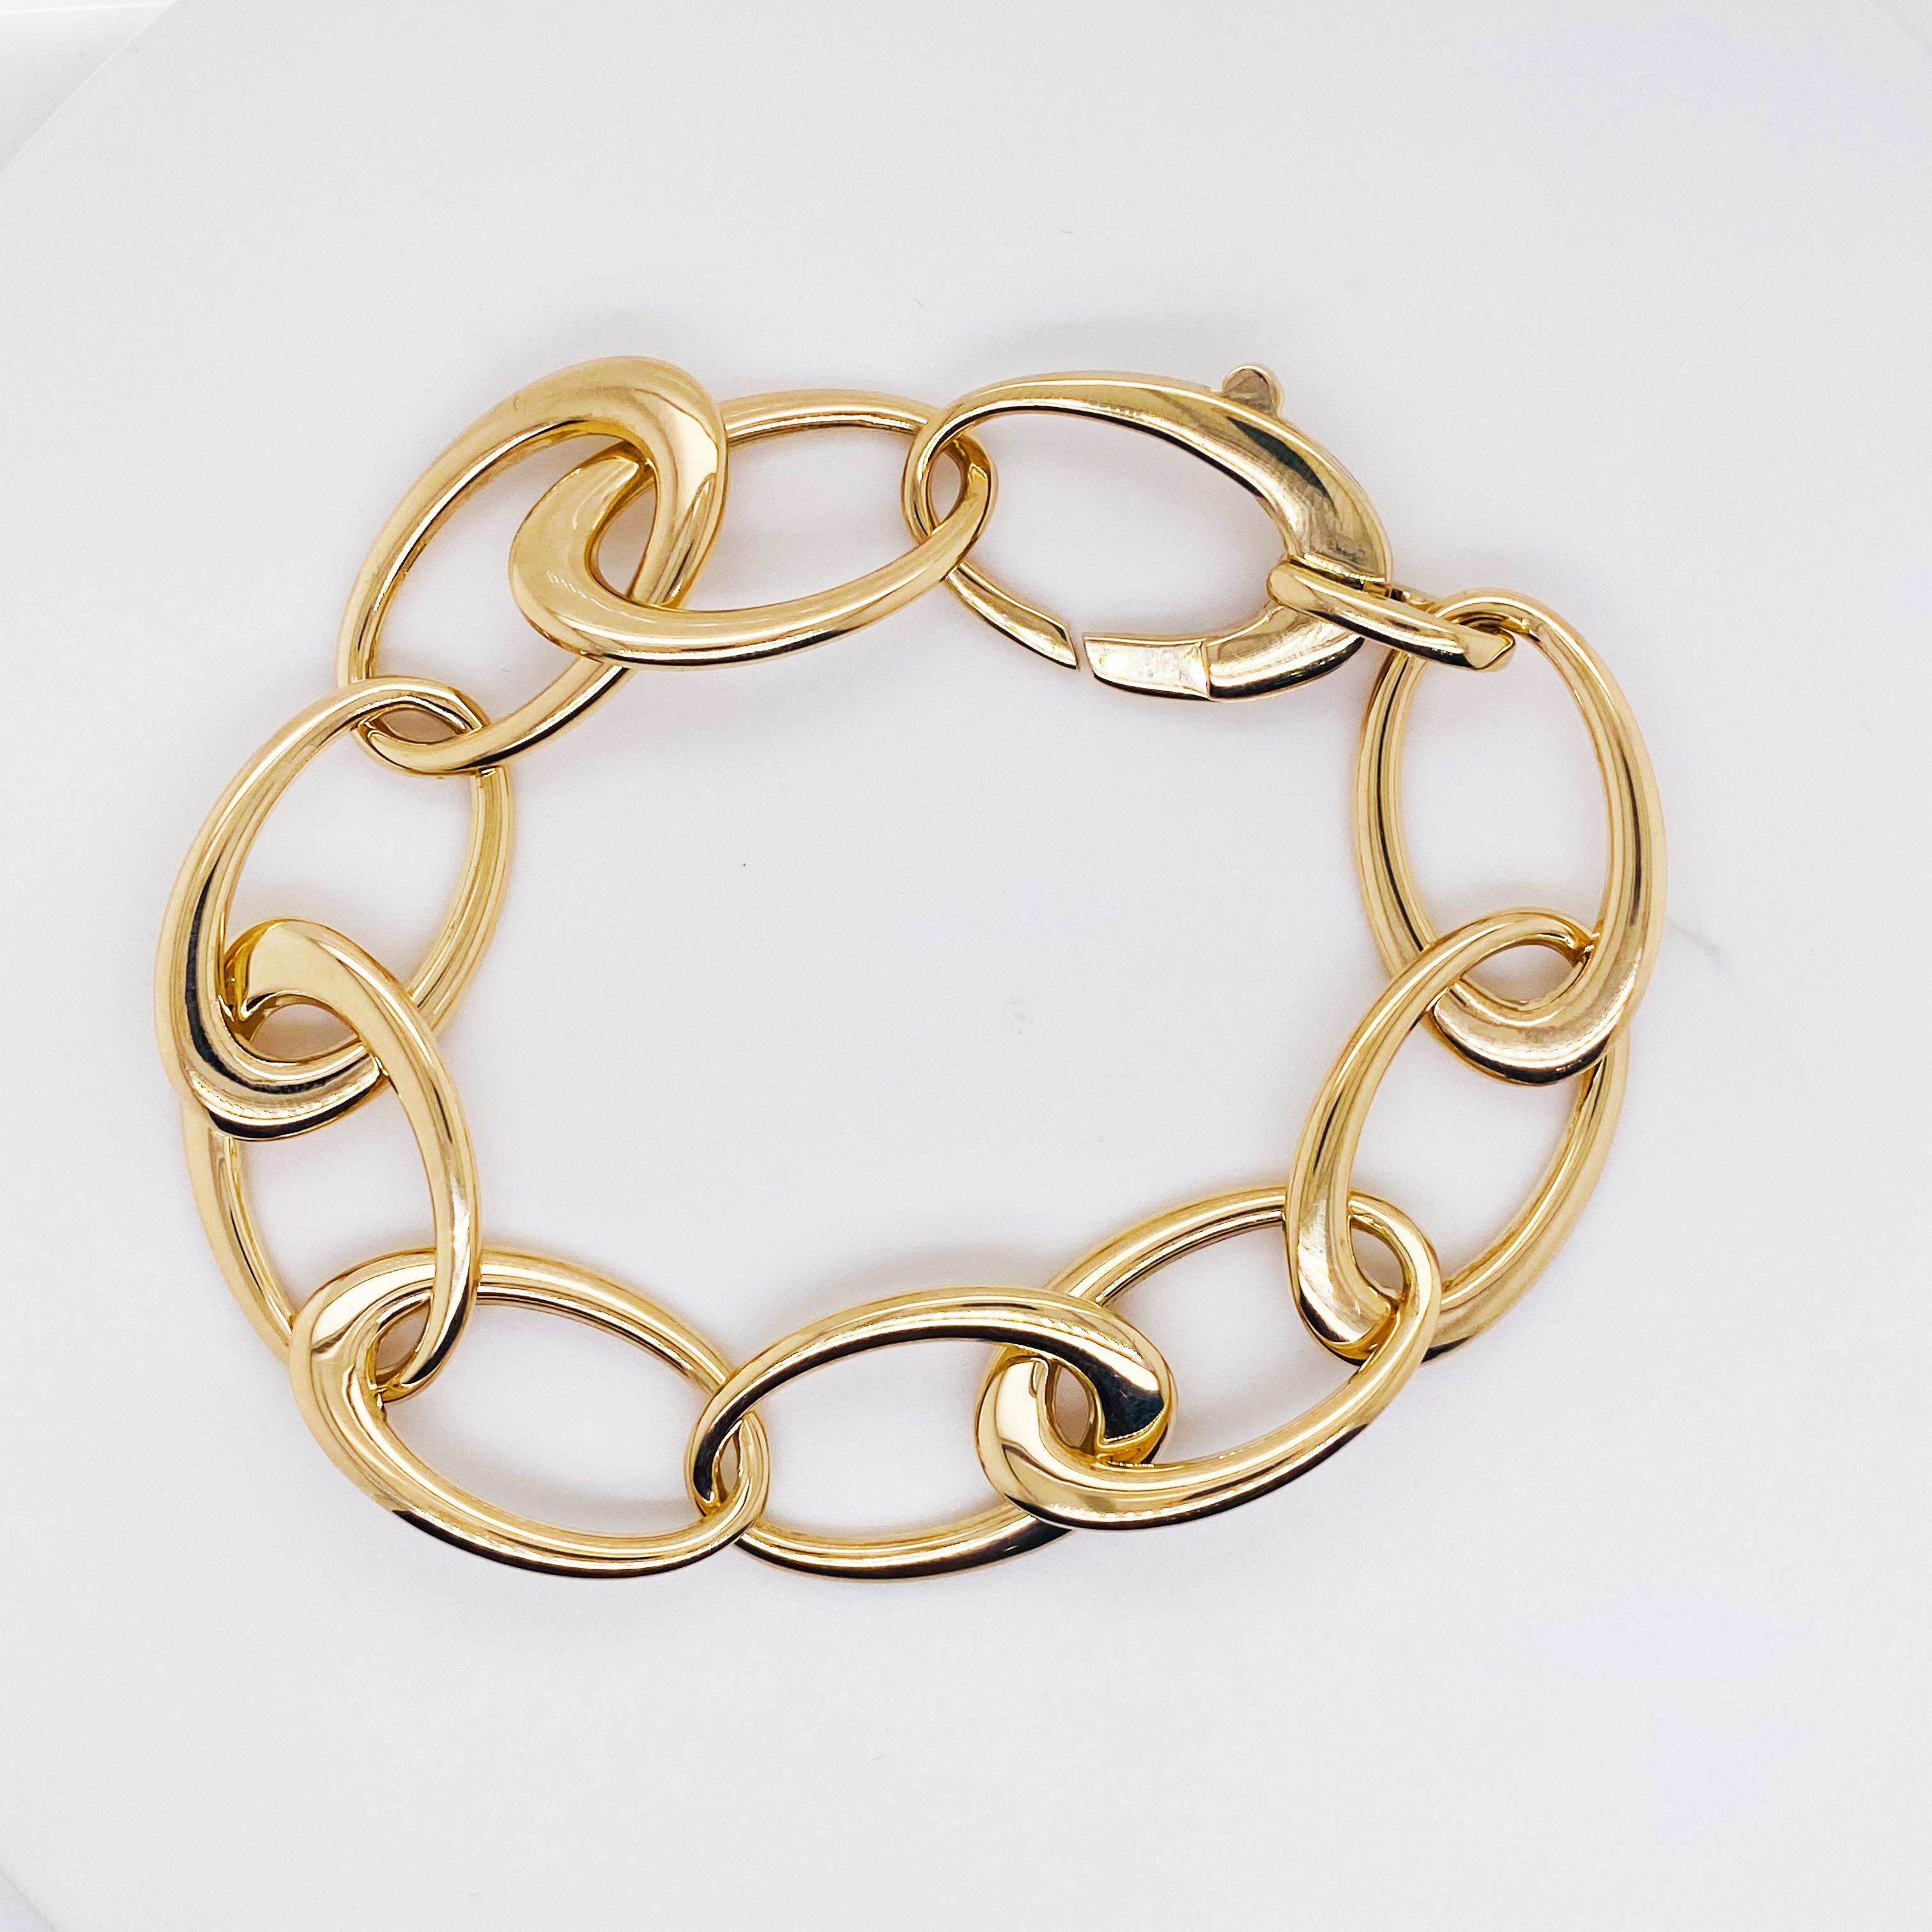 Oval Link Chain Bracelet - 14K Gold Italian Gold Bracelet Large Oval Links In New Condition For Sale In Austin, TX